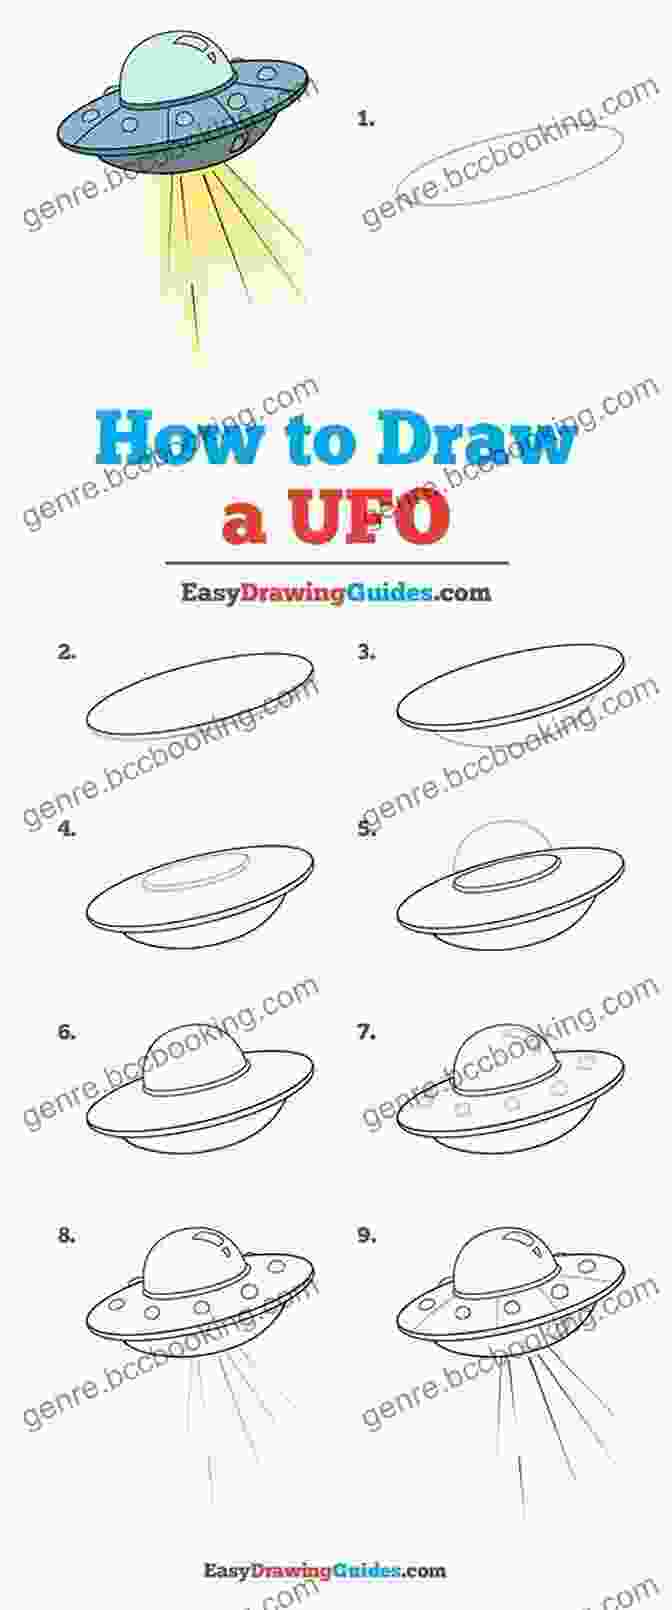 Step By Step Guide To Drawing UFOs Draw 50 Aliens: The Step By Step Way To Draw UFOs Galaxy Ghouls Milky Way Marauders And Other Extraterrestrial Creatures